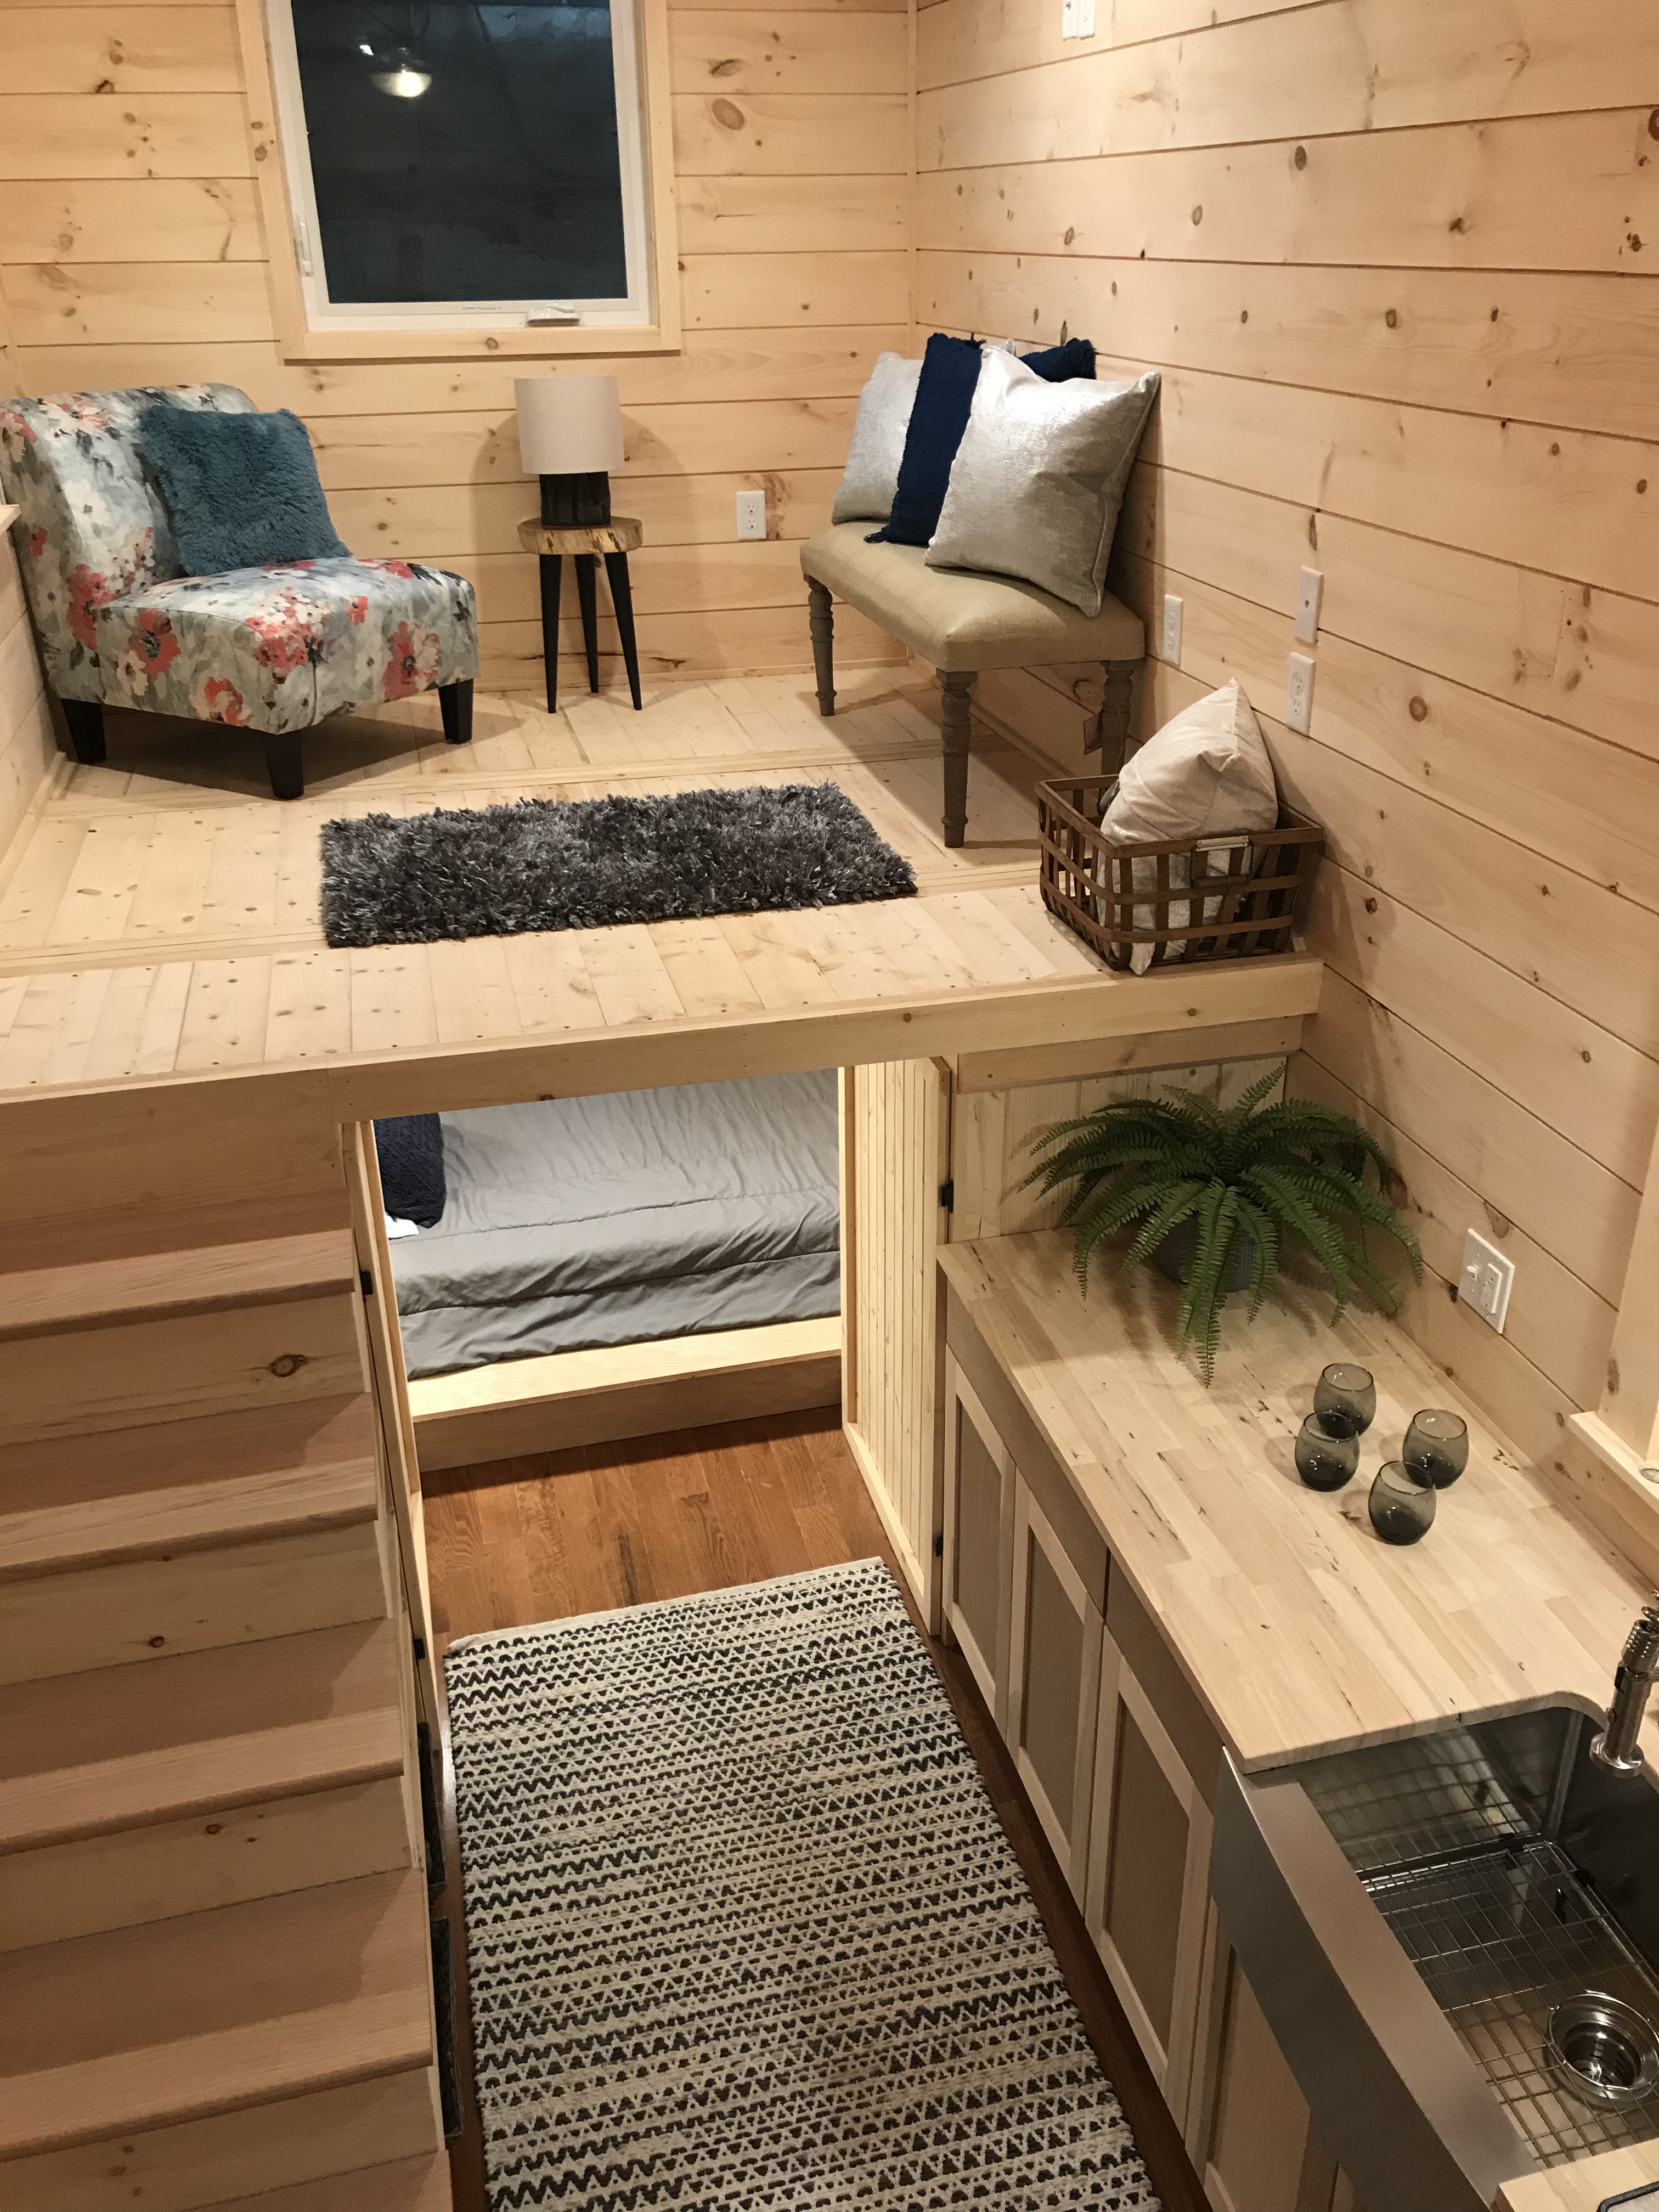 Sweet Dream - Incredible Tiny Homes